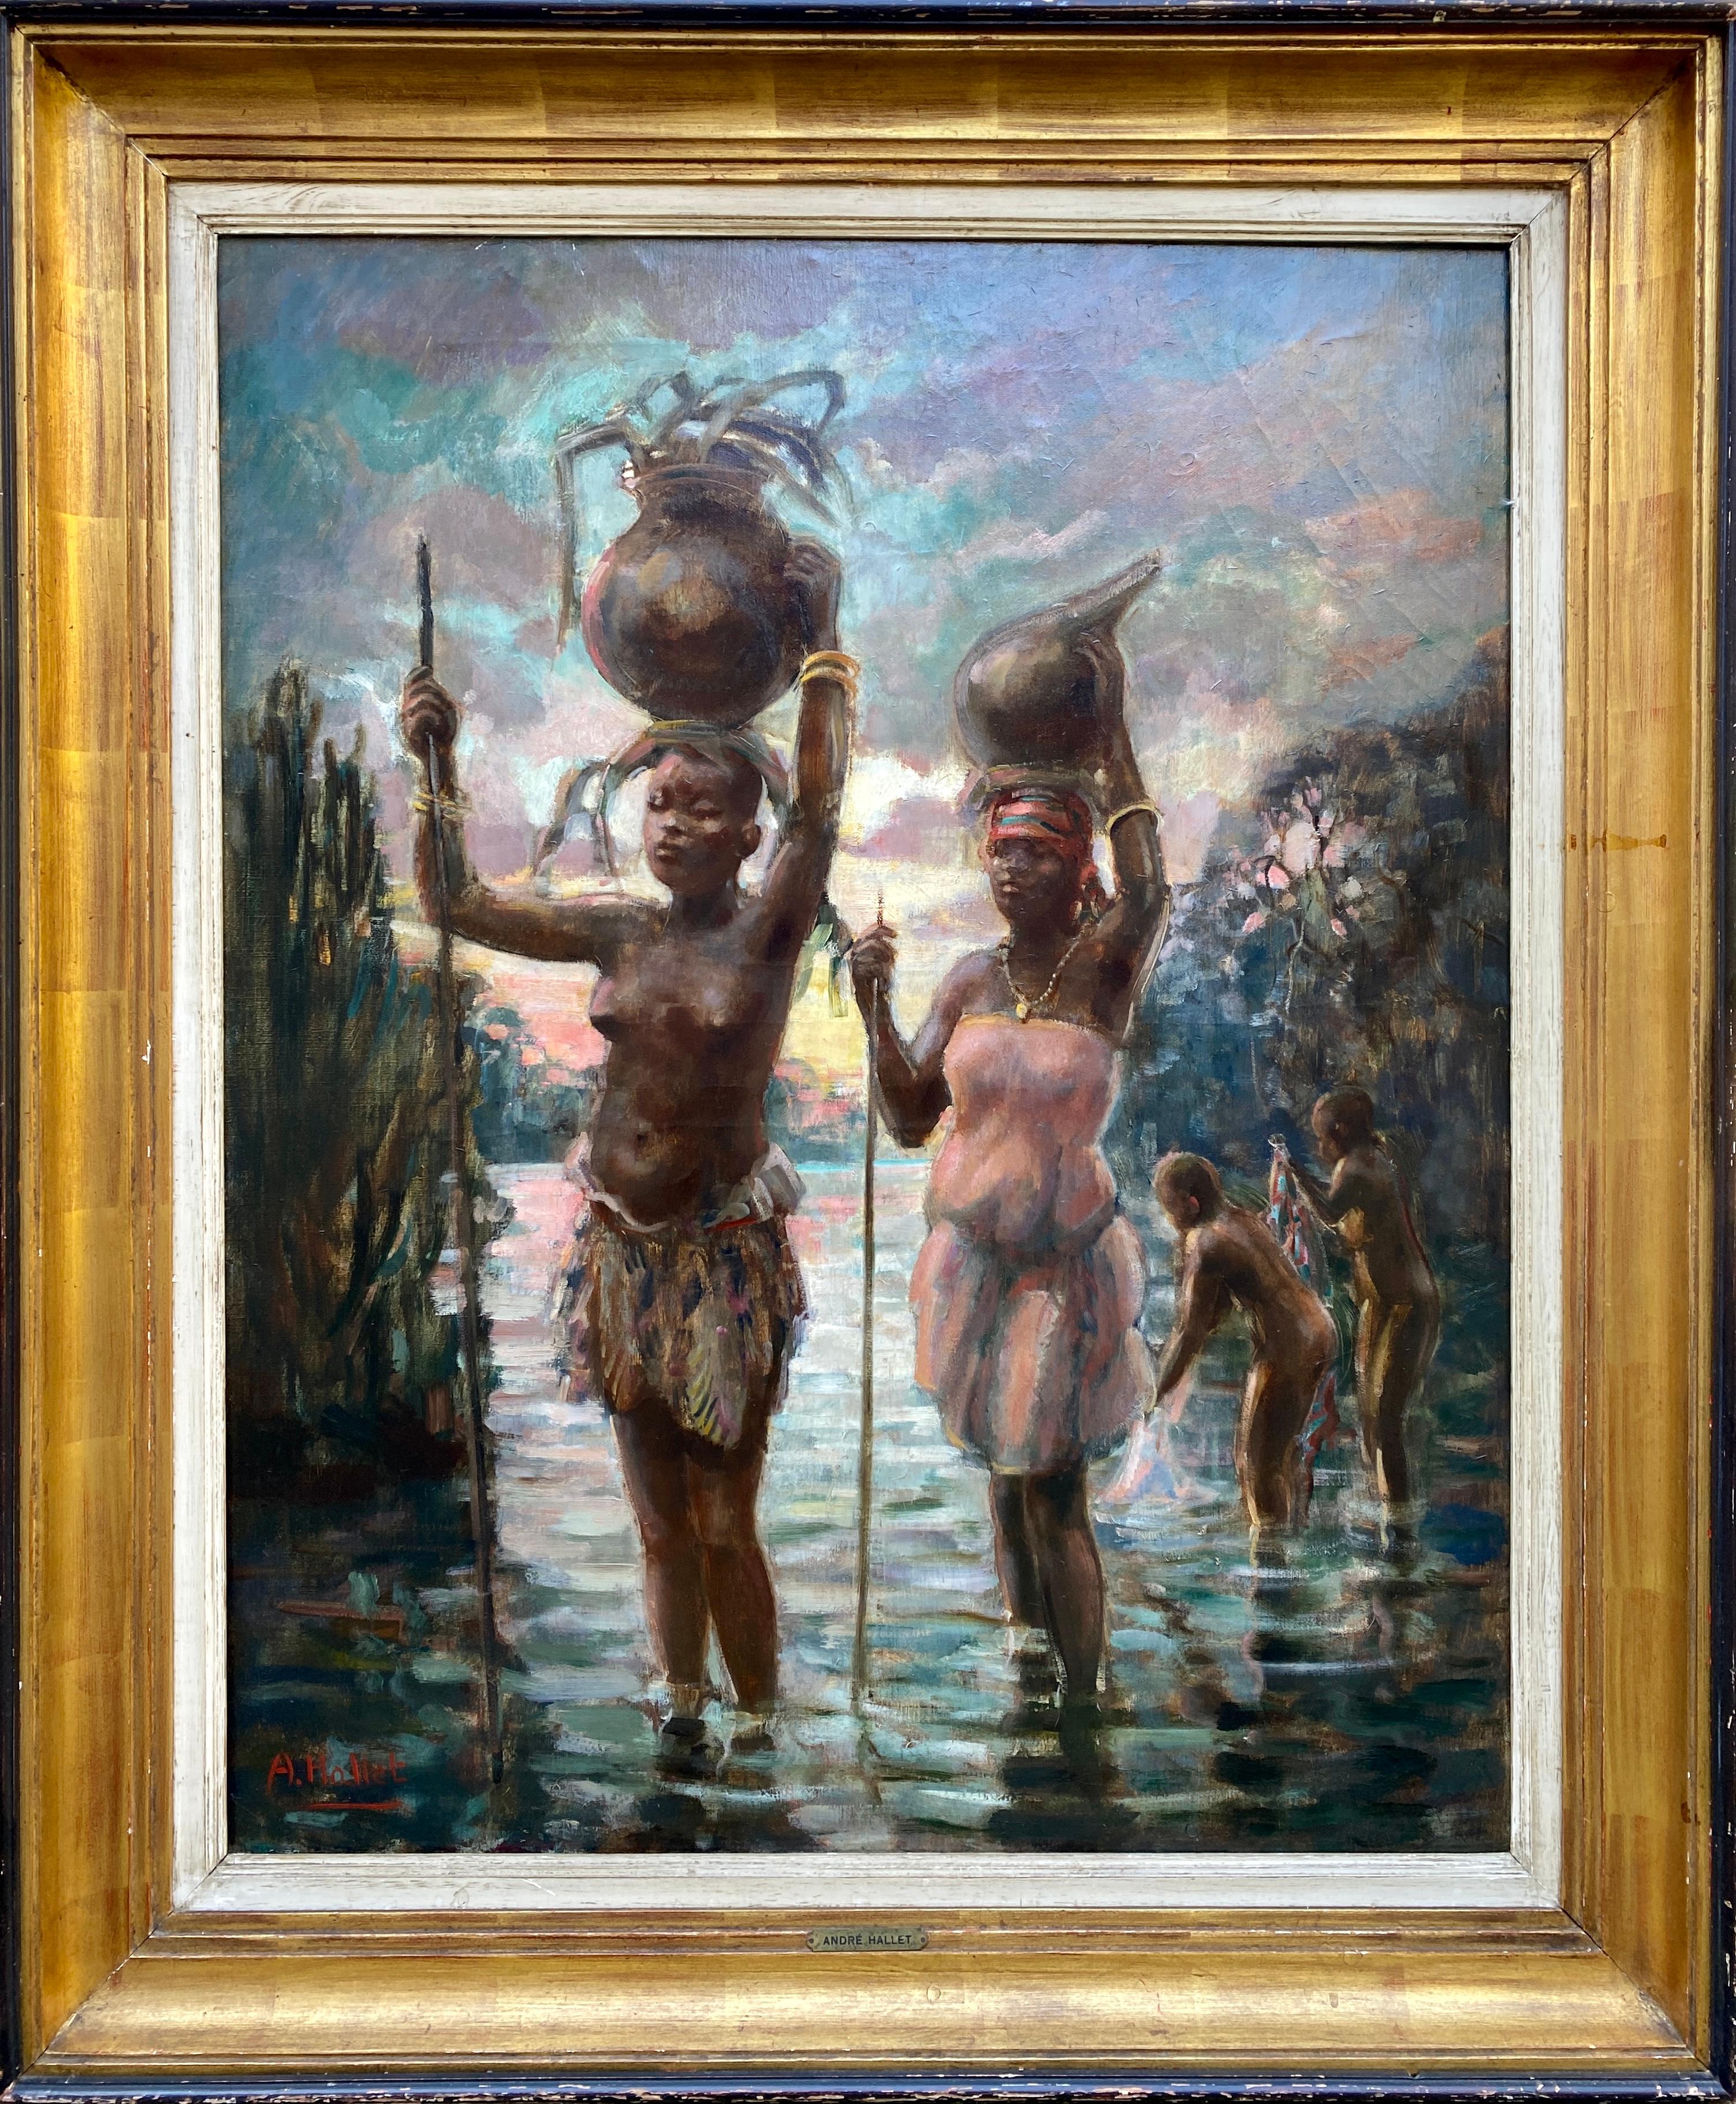 André Hallet
Liège, Belgium 1890 – 1959 Kisenyi, Rwanda
Belgian Painter

'The Water Carriers'
Signature: Signed bottom left, placed and named on reverse
Medium: Oil on canvas
Dimensions: Image size 100 x 80,50 cm, frame size 120,50 x 100,50